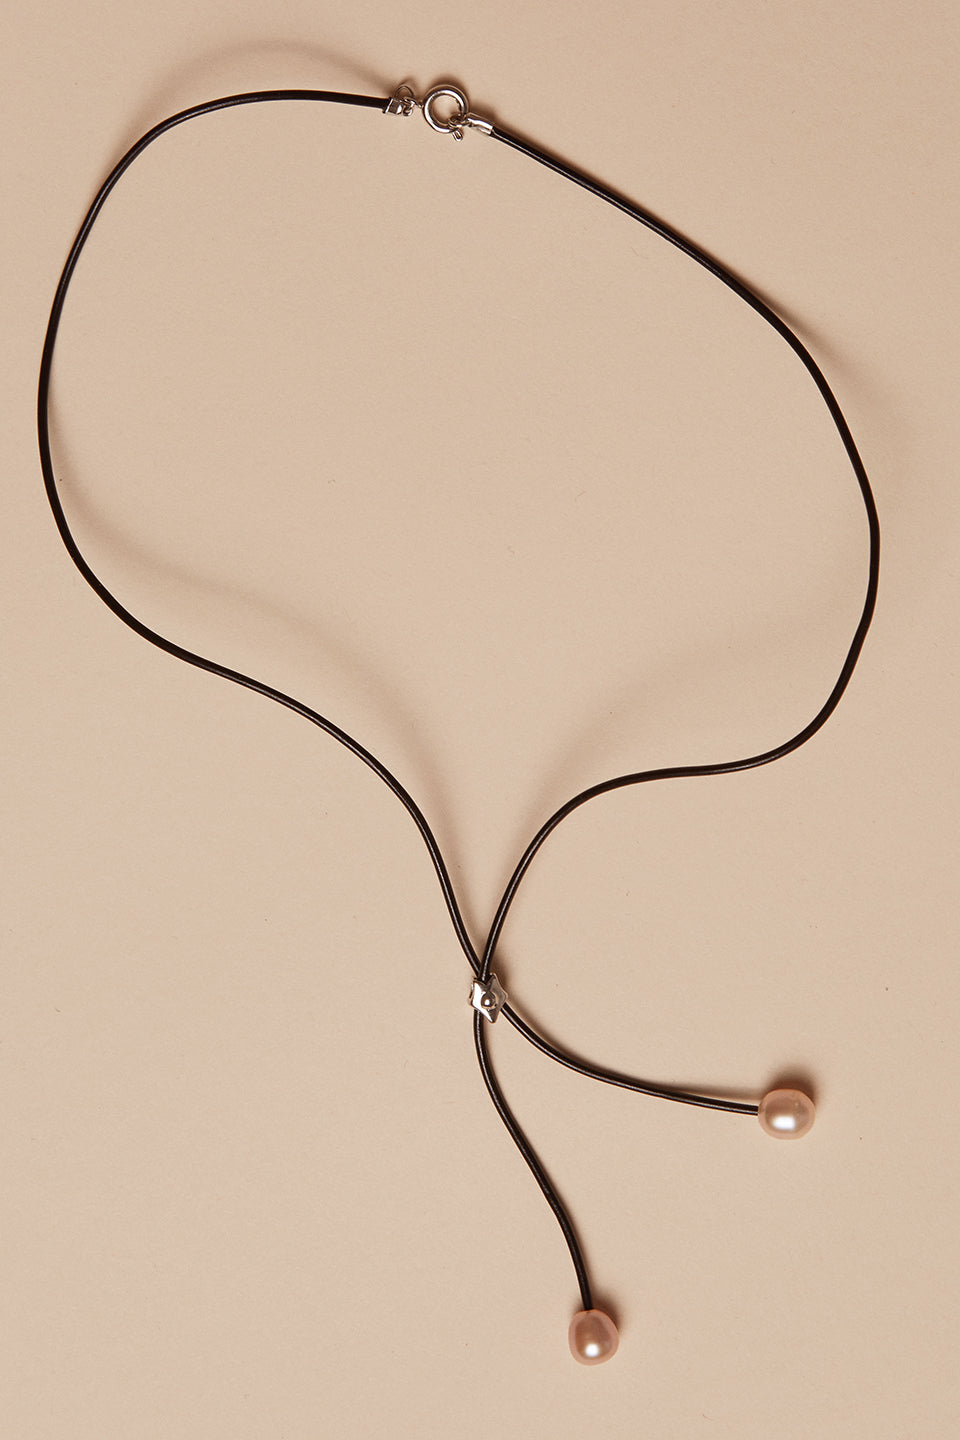 UNSPECIFIED BRAND  <br>  Bolo Tie Necklace